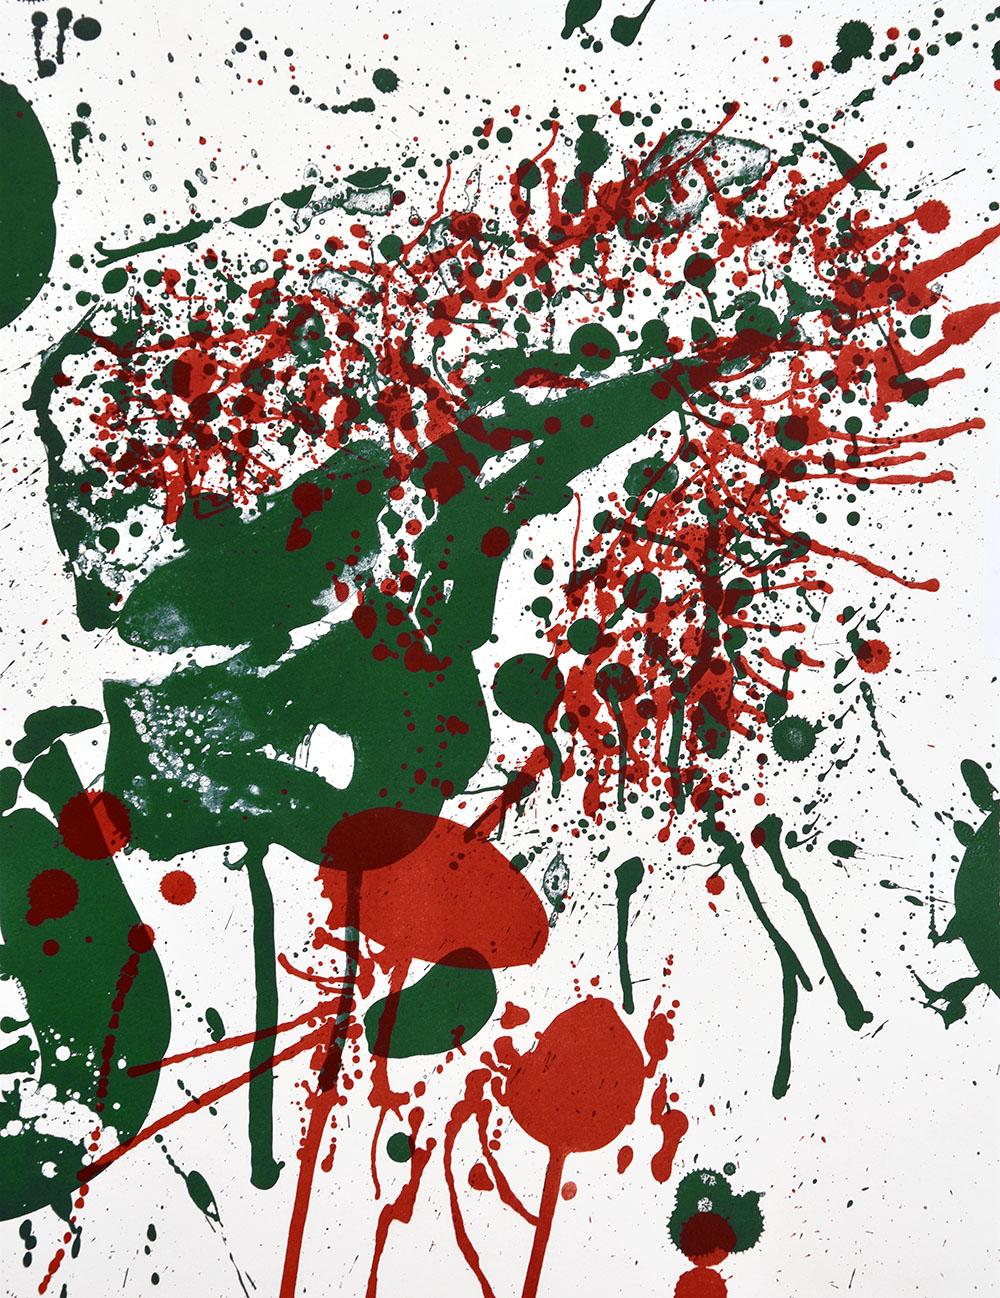 Untitled, 1963 - Abstract Expressionist Print by Sam Francis